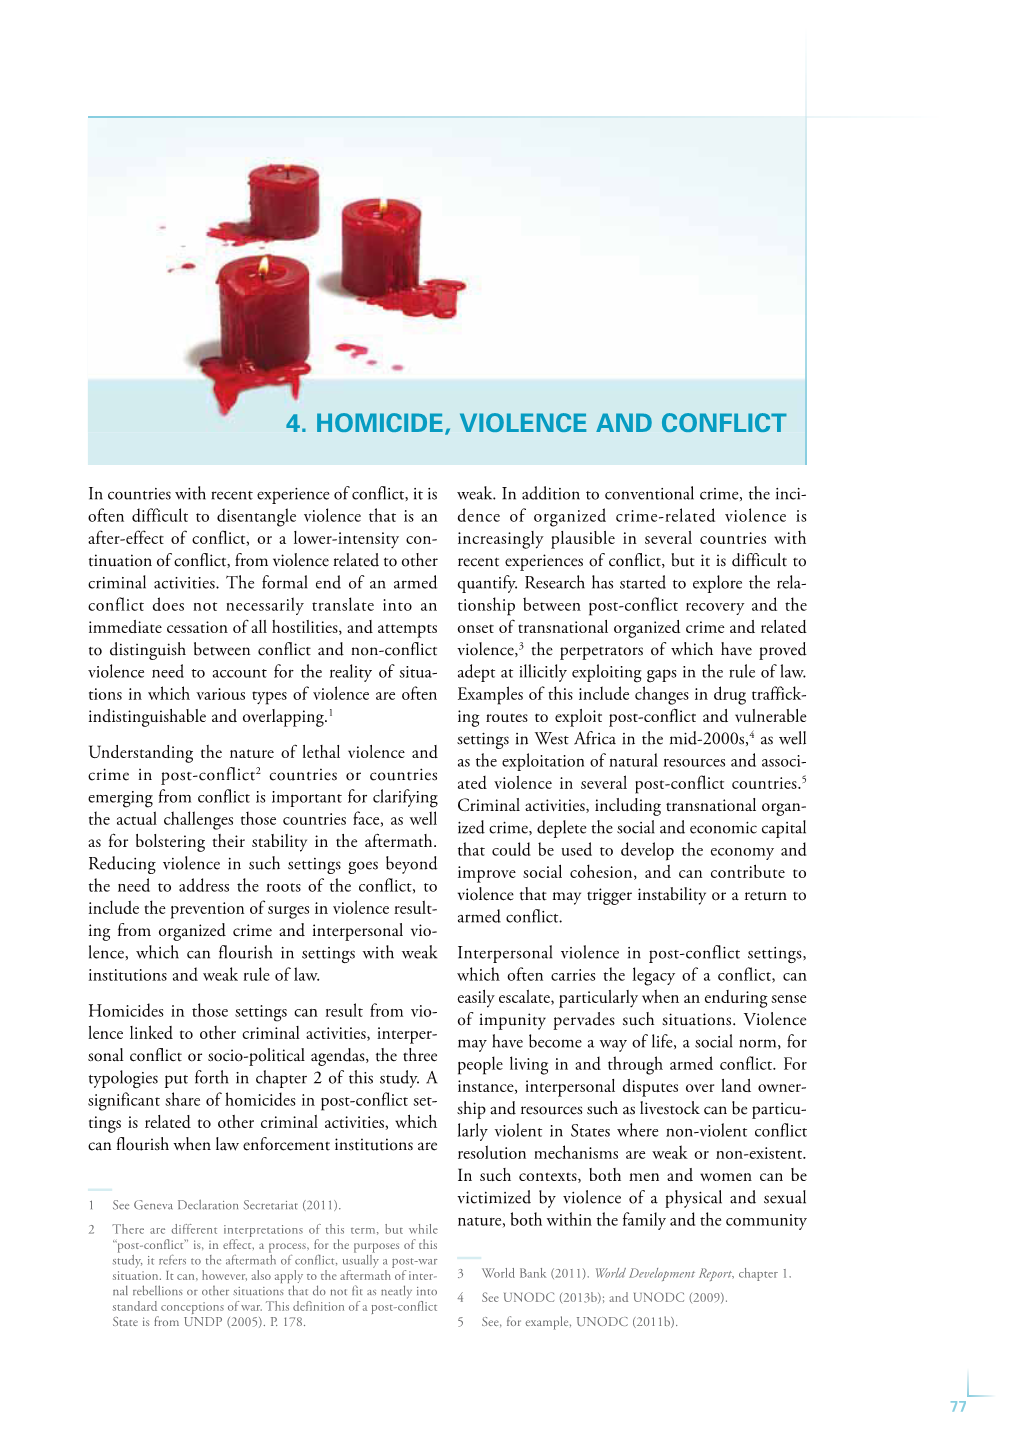 4. Homicide, Violence and Conflict